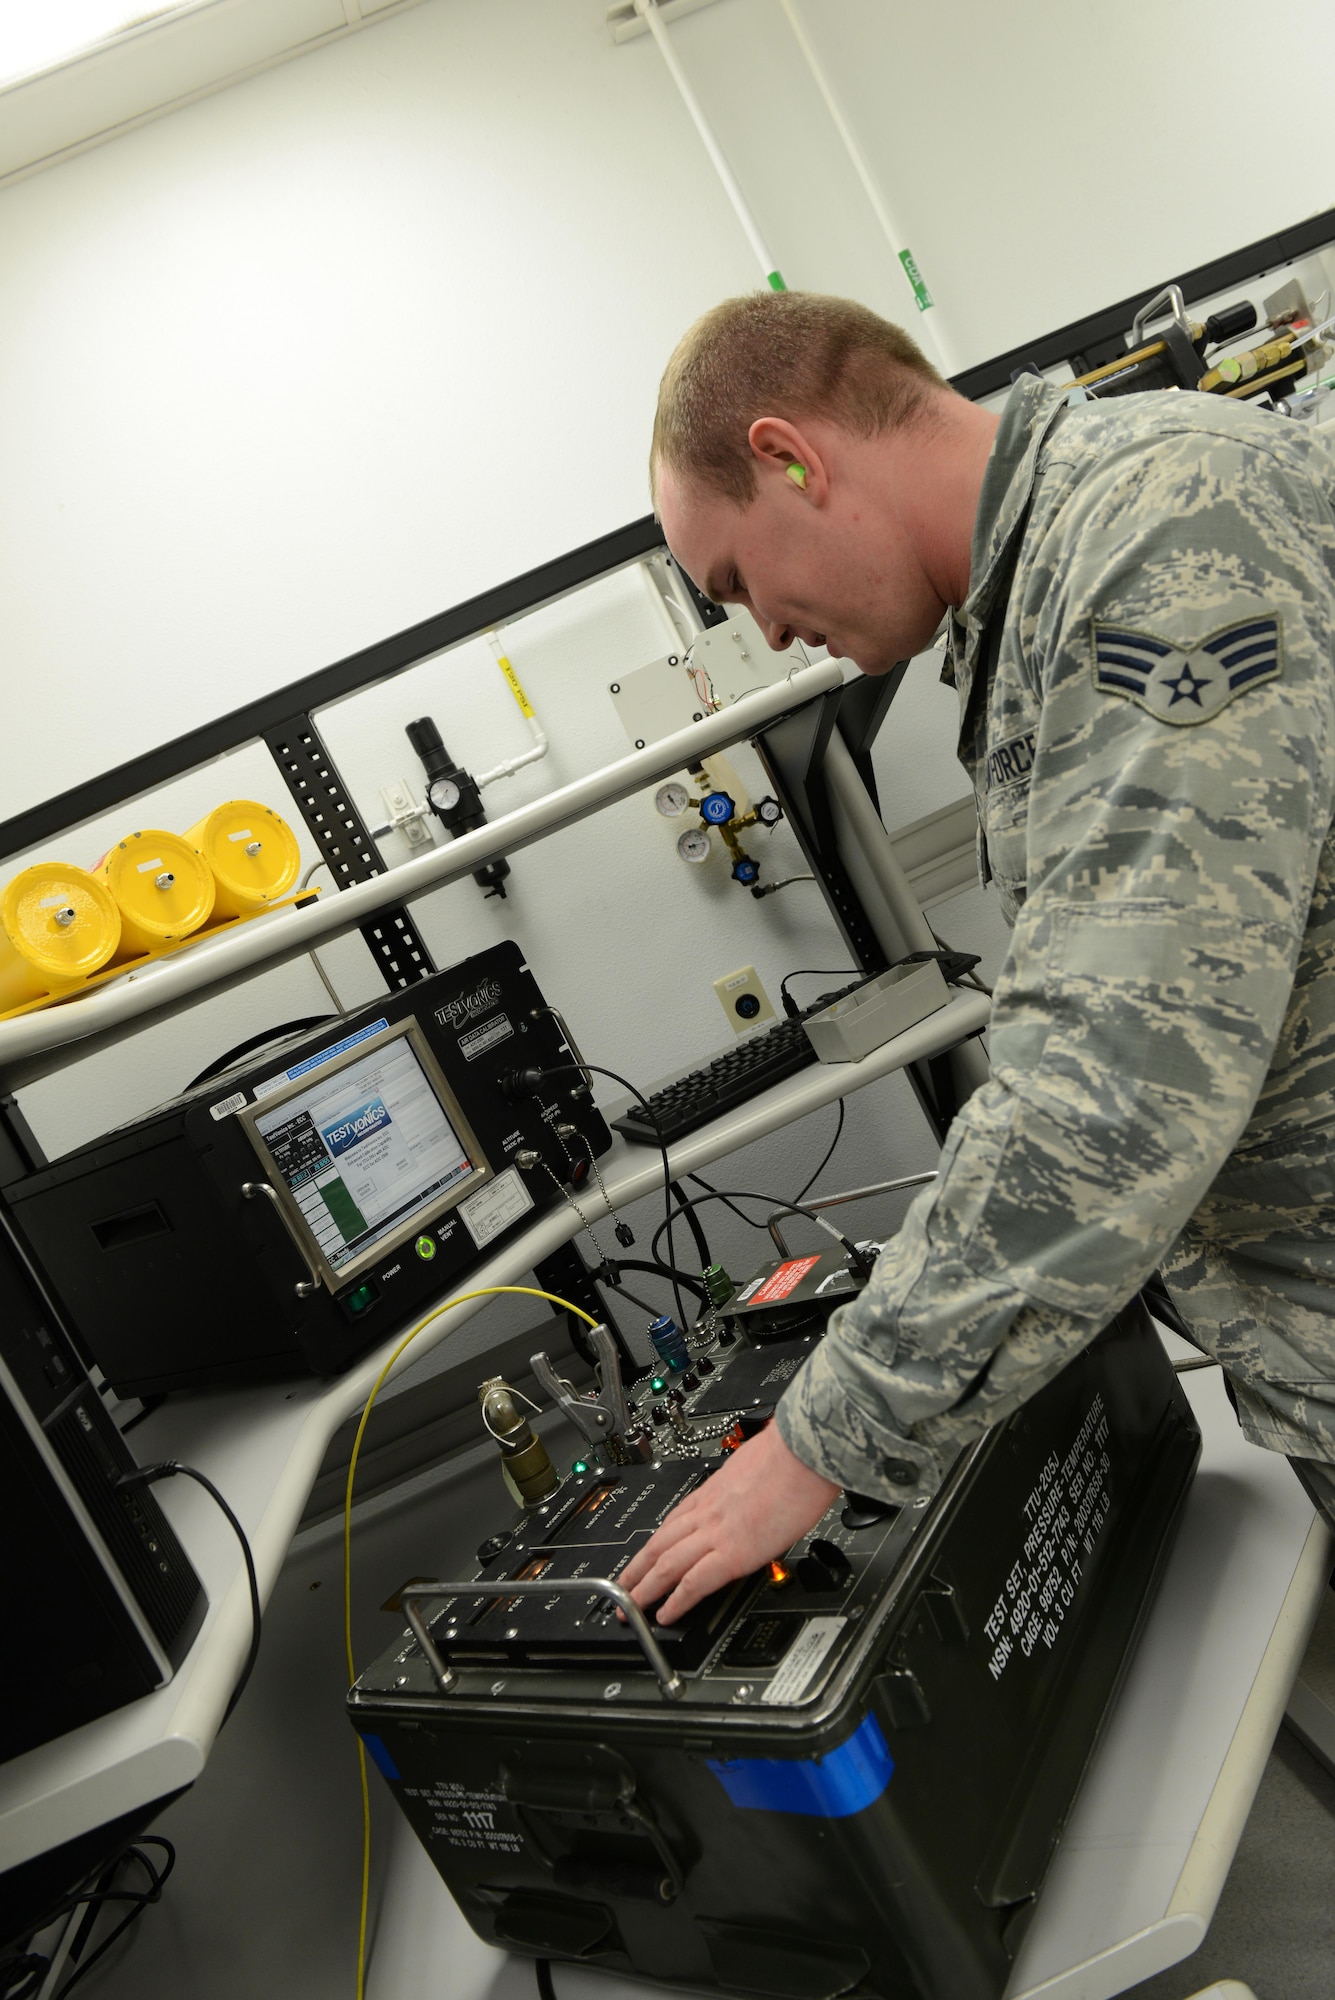 Senior Airman Daniel Bergin, 56th Component Maintenance Squadron precision measurement equipment laboratory technician, calibrates an air speed altitude tester Jan. 24, 2017, at Luke Air Force Base, Ariz. The tester is used for the F-16 fighting falcon to simulate air speed and altitude for the aircraft to ensure the instrument on the aircraft is reading at the correct levels. (U.S. Air Force photo by Airman 1st Class Pedro Mota)